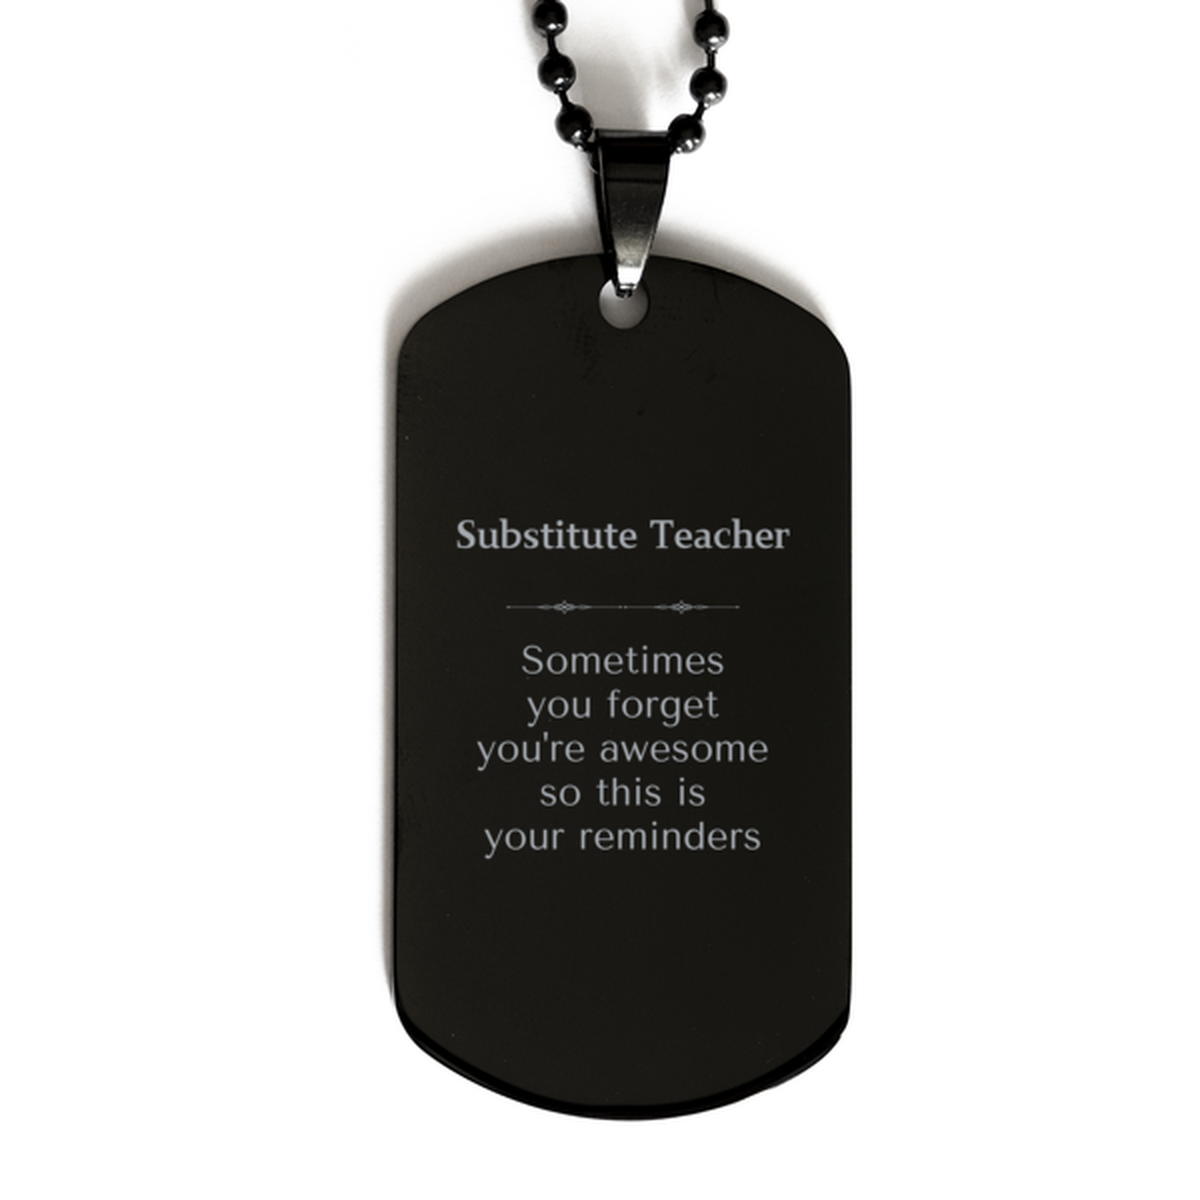 Sentimental Substitute Teacher Black Dog Tag, Substitute Teacher Sometimes you forget you're awesome so this is your reminders, Graduation Christmas Birthday Gifts for Substitute Teacher, Men, Women, Coworkers